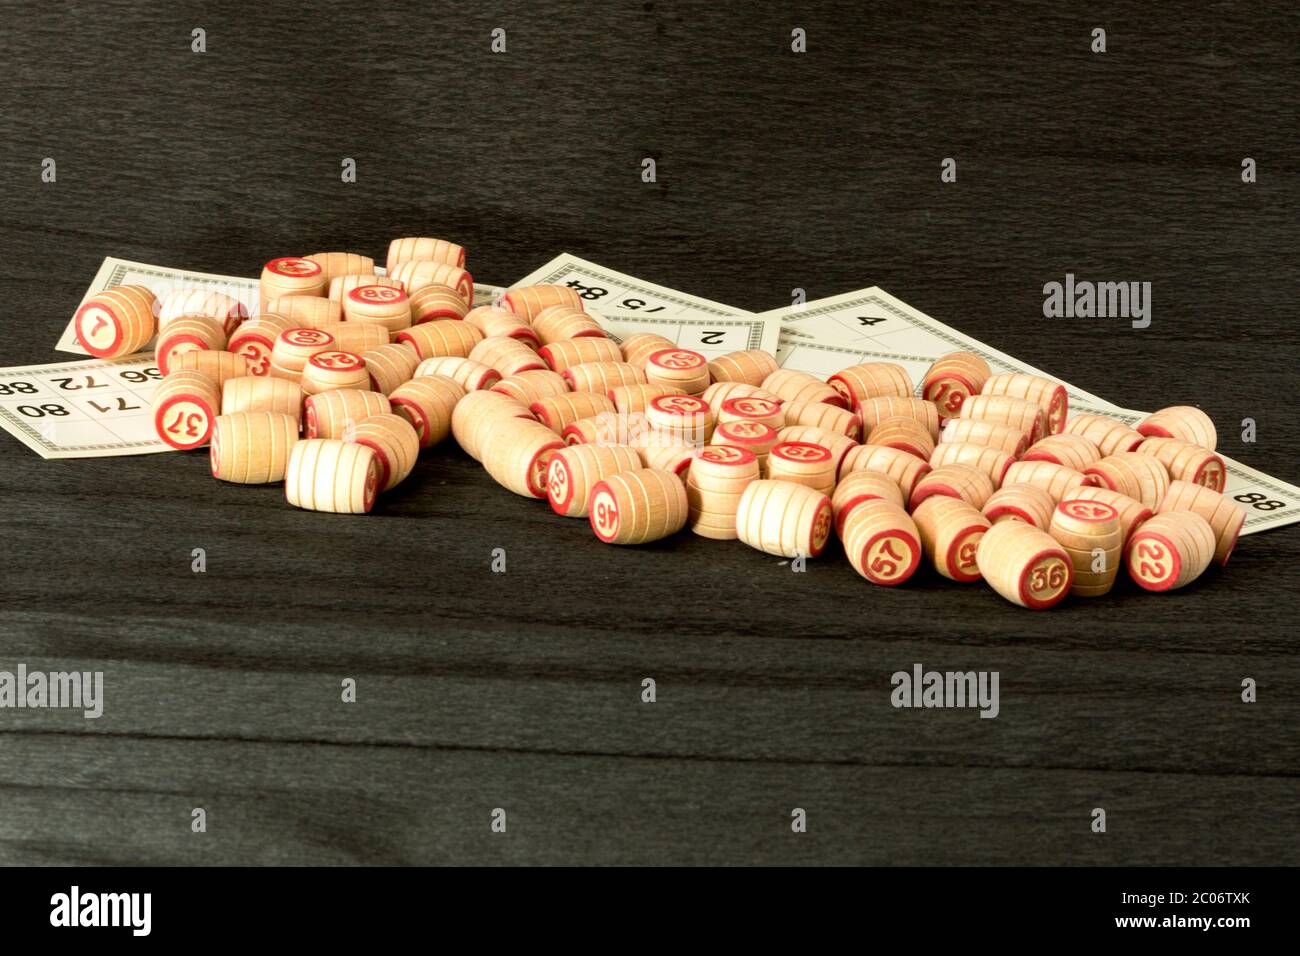 Barrels of lotto lie scattered on a black background Stock Photo